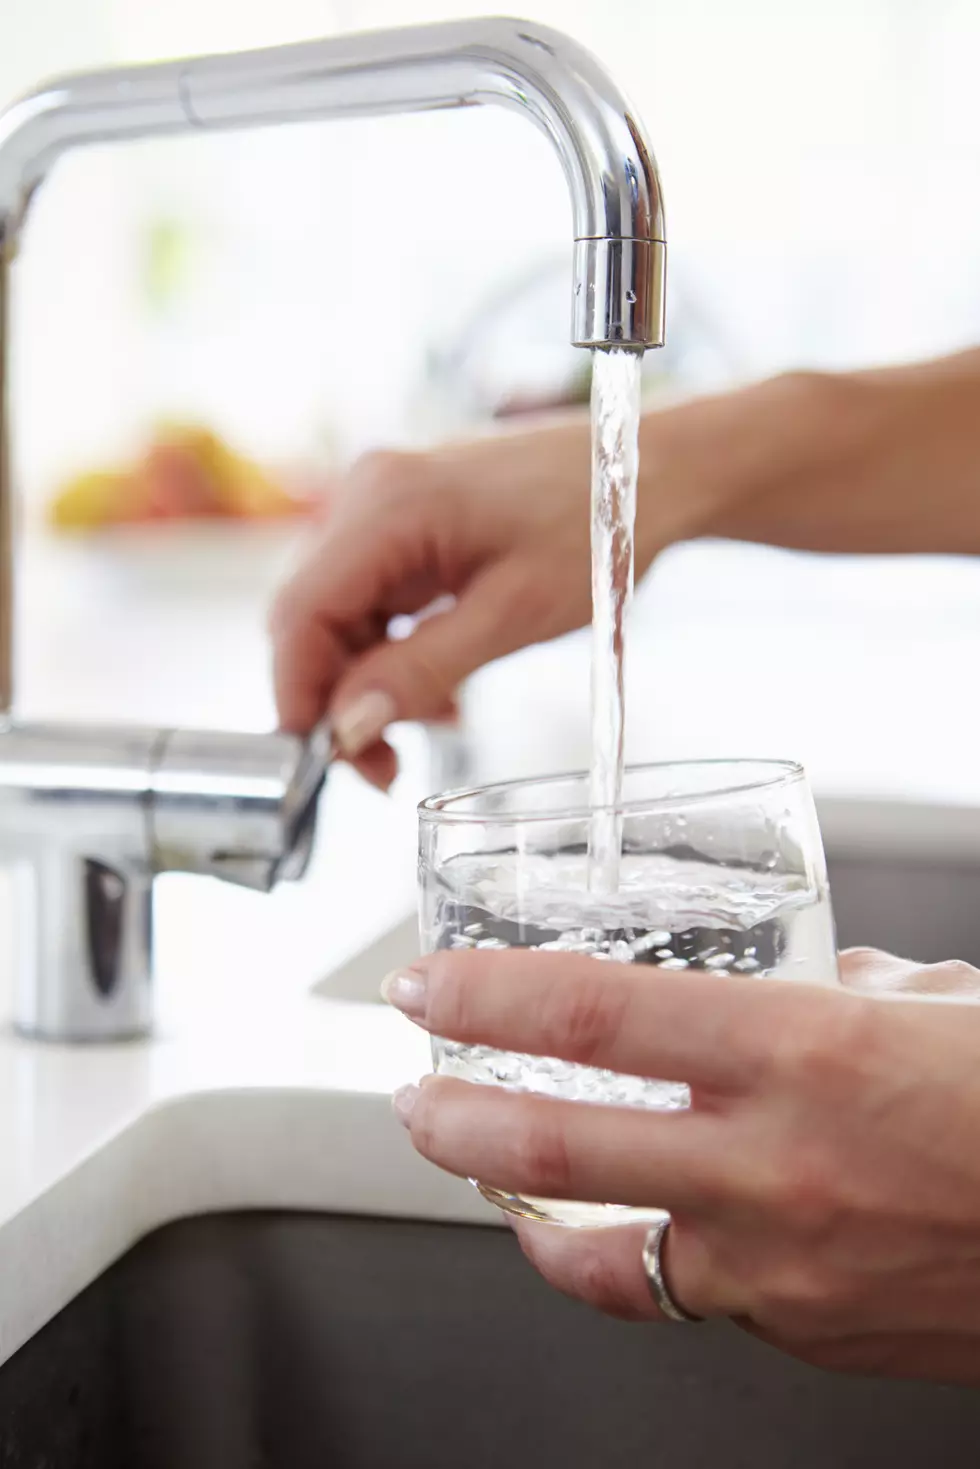 Hannibal BPW Water Rates Going Up 3.5% July 2